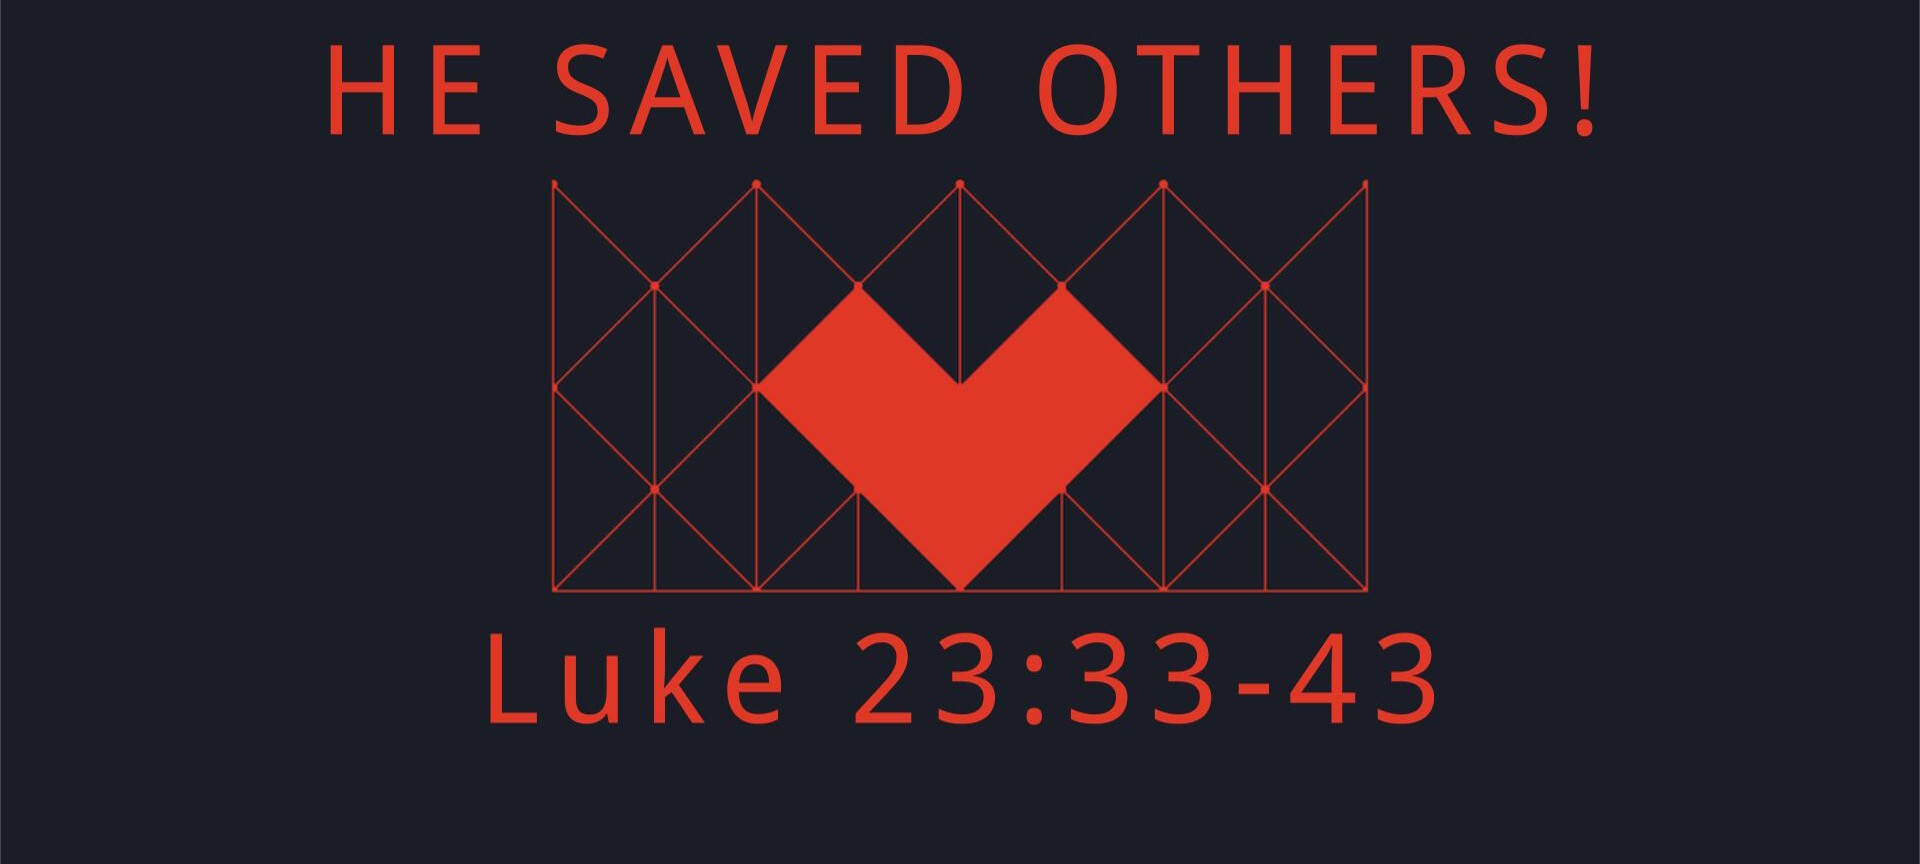 He Saved Others!